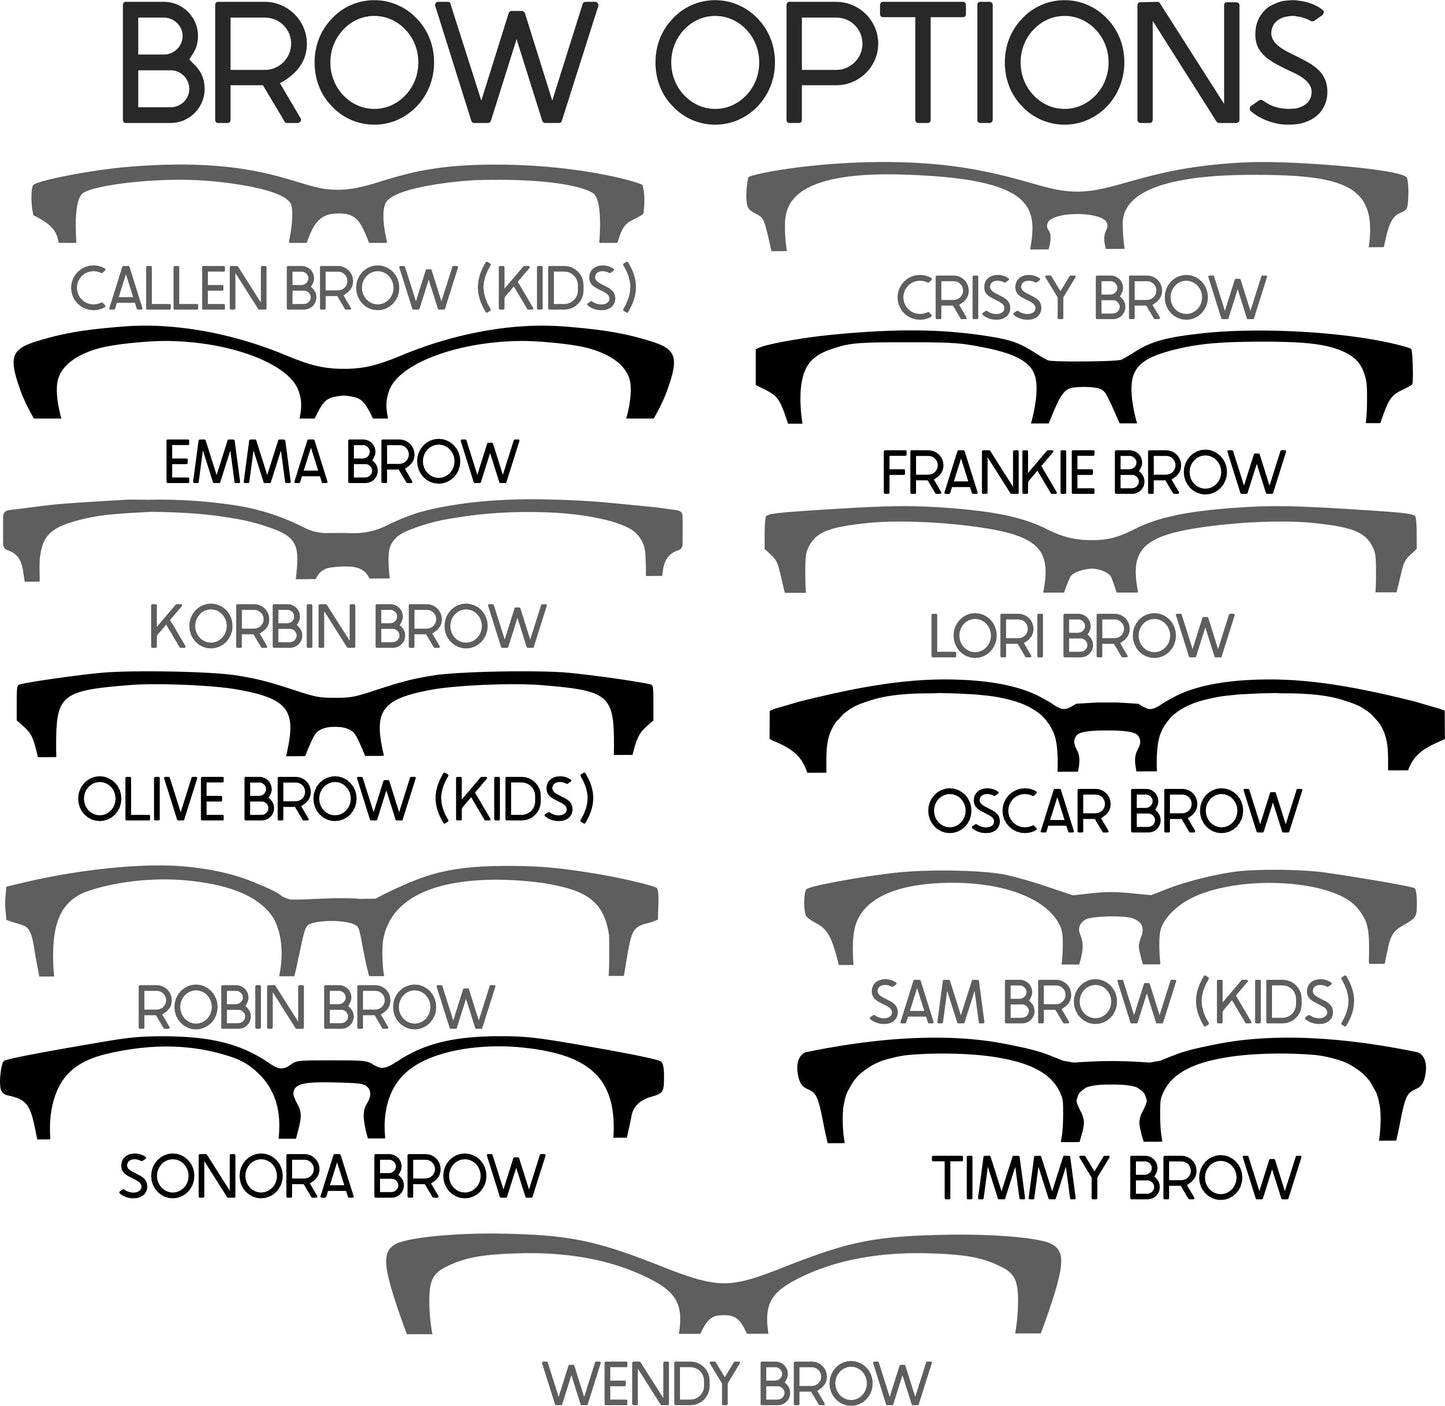 HAIR COLOR MIXING BOWL Eyewear Frame Toppers COMES WITH MAGNETS